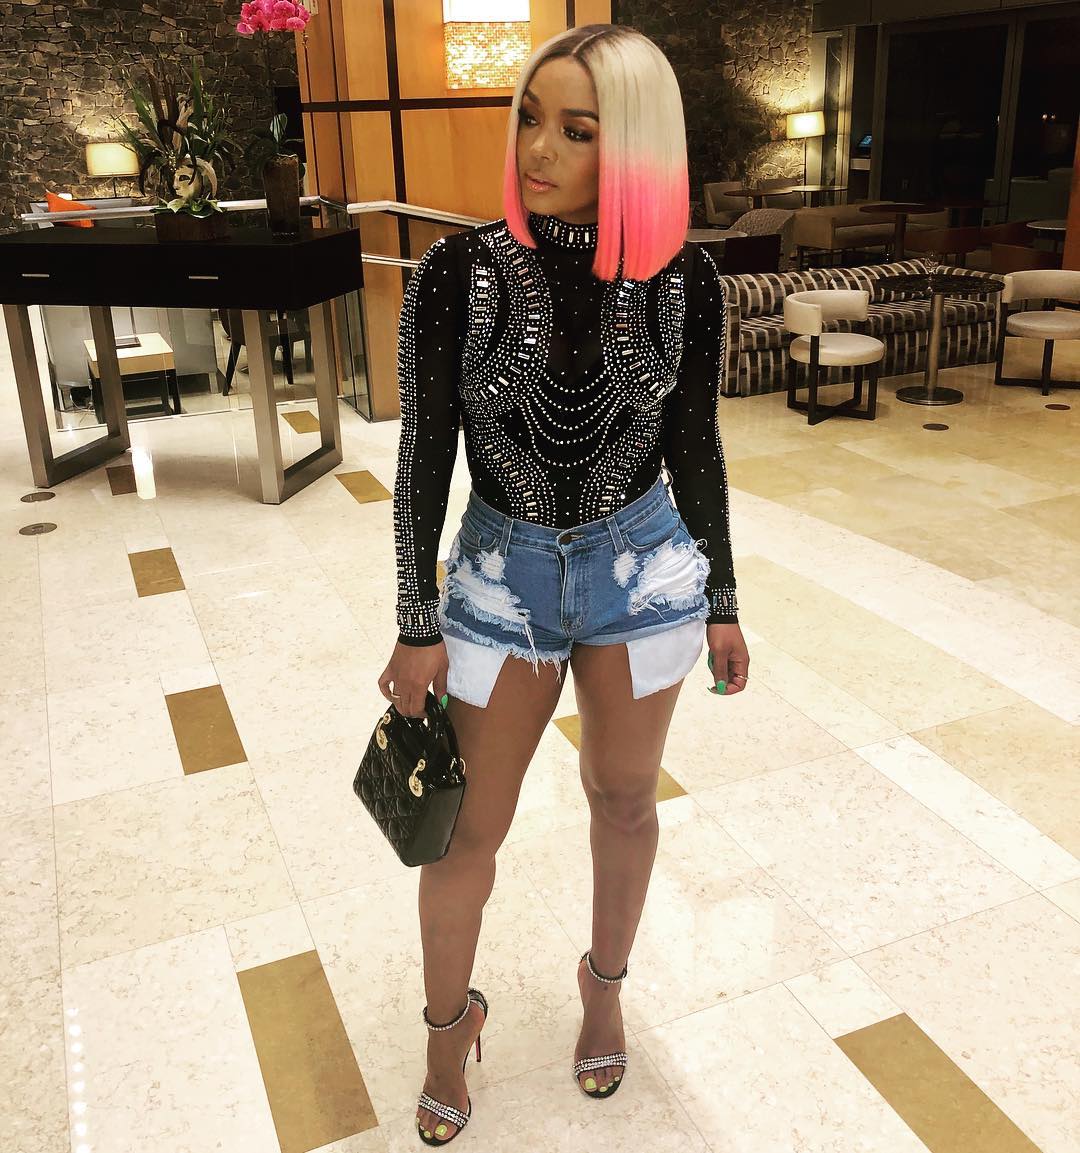 ”rasheeda-frost-shows-off-her-generous-curves-in-this-outfit”